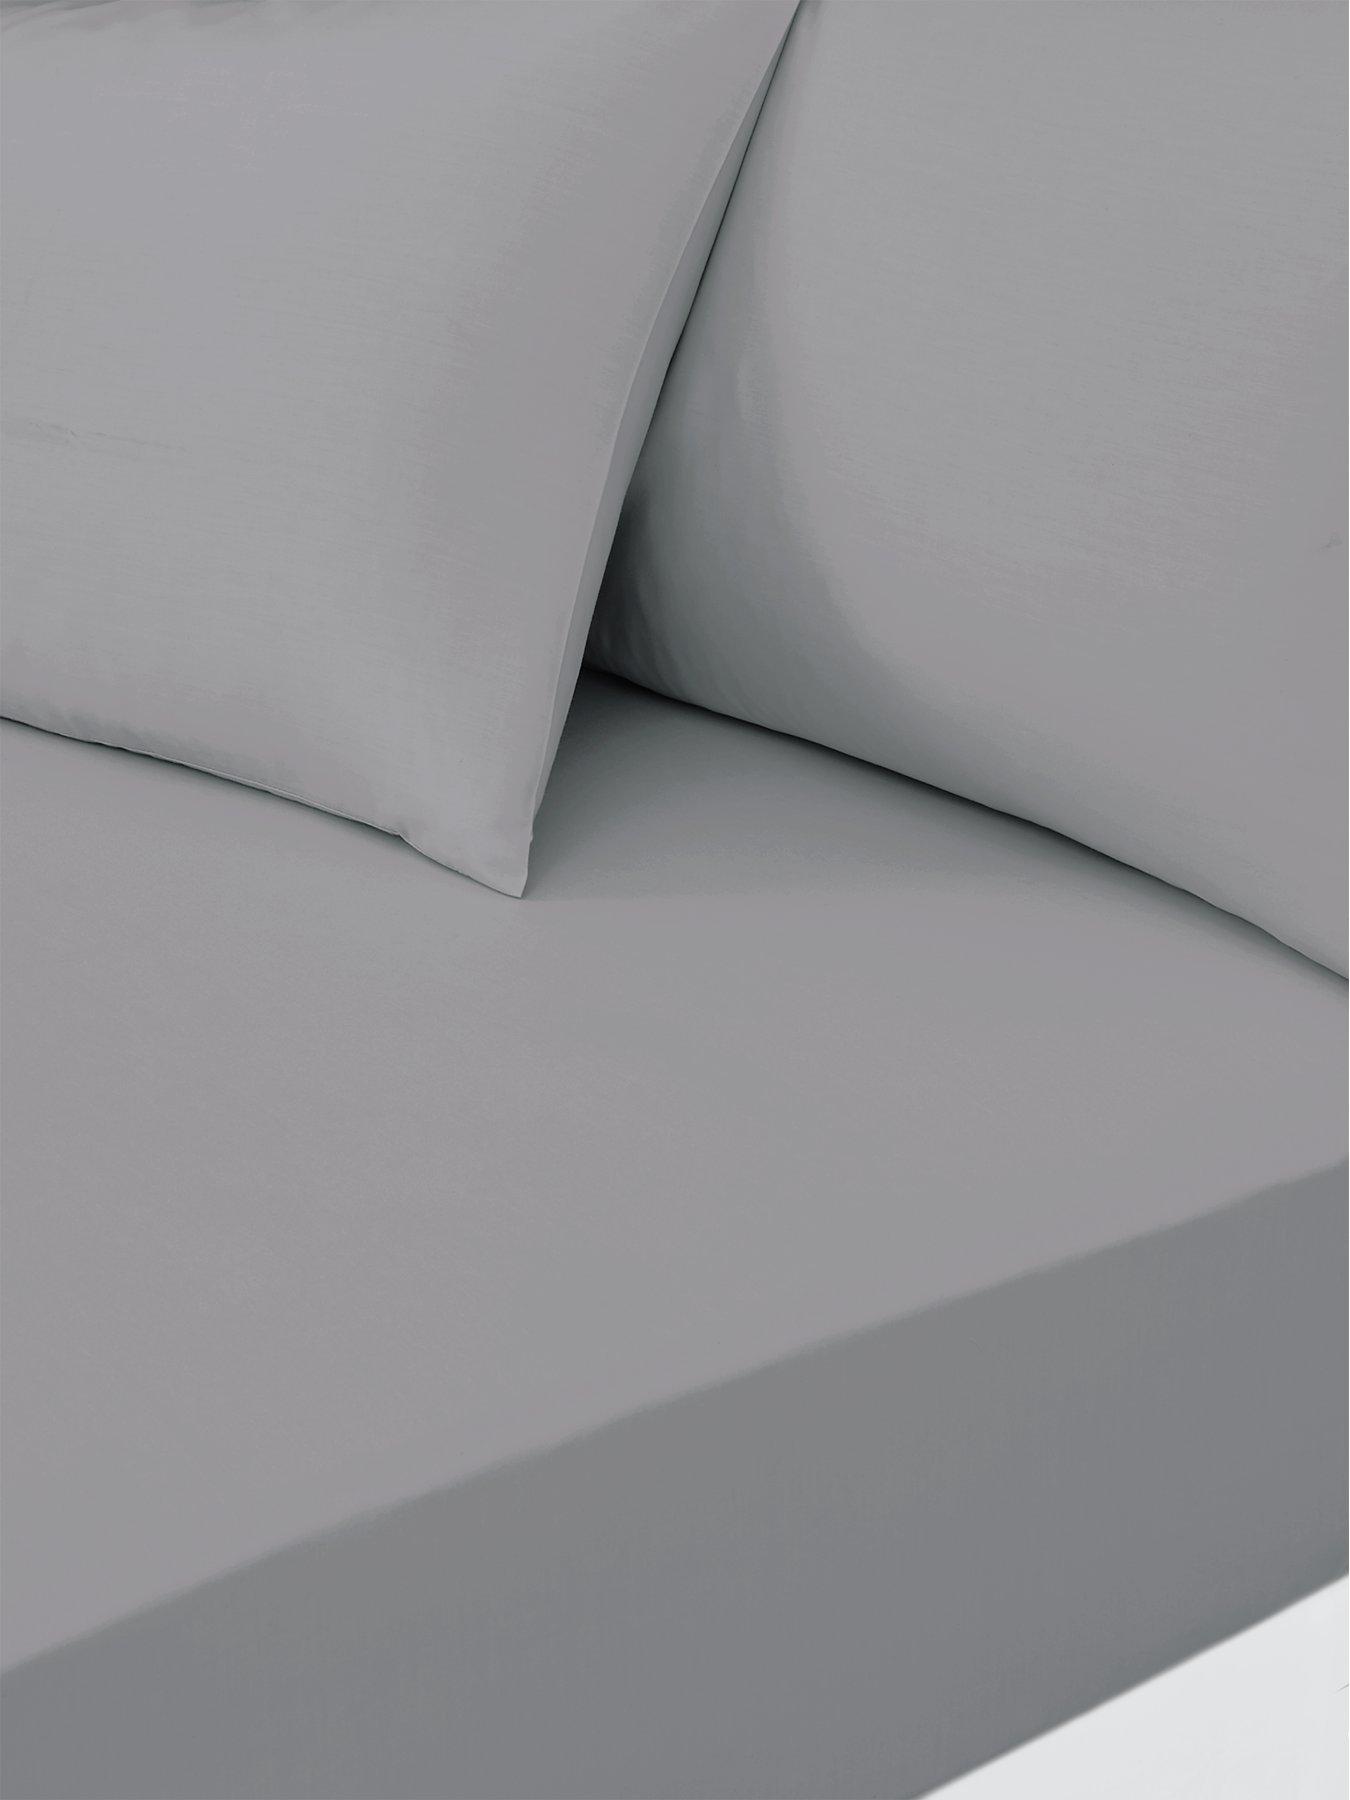 14" Deep Details about   1000 Thread count My-Pillows Bed Sheets Set 100% Egyptian Cotton 9"